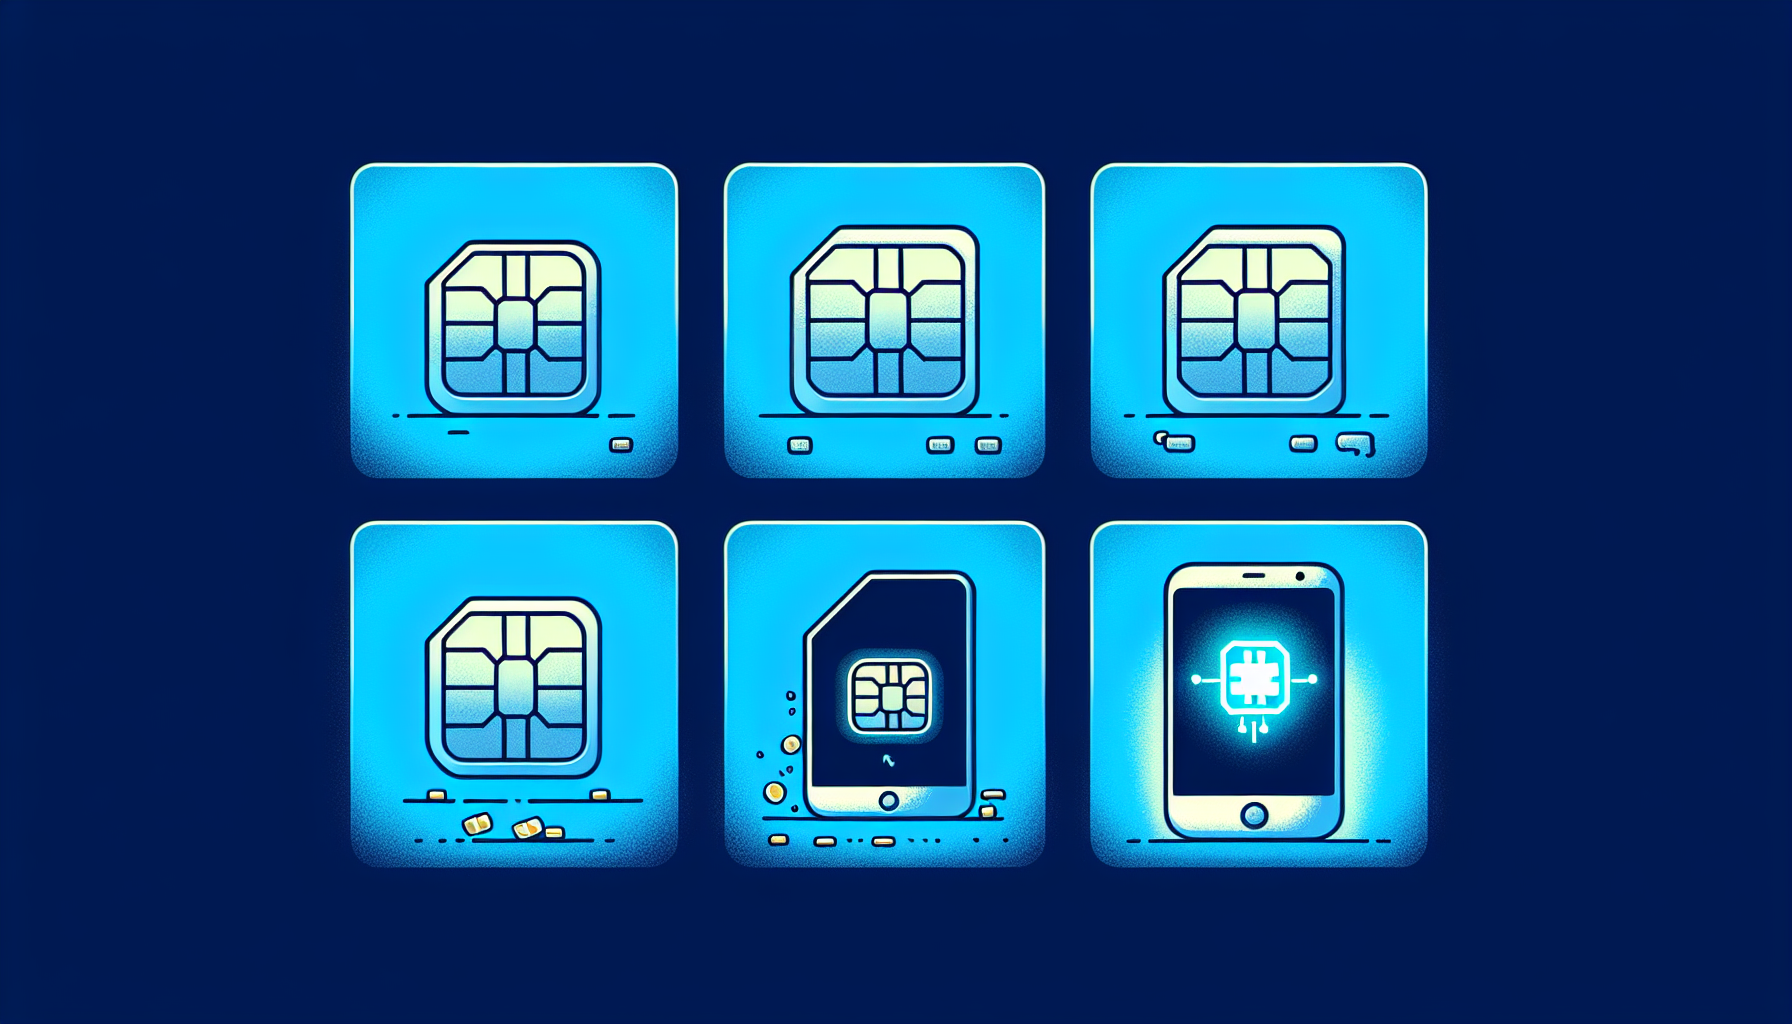 Illustration of evolution from physical SIM cards to eSIM technology